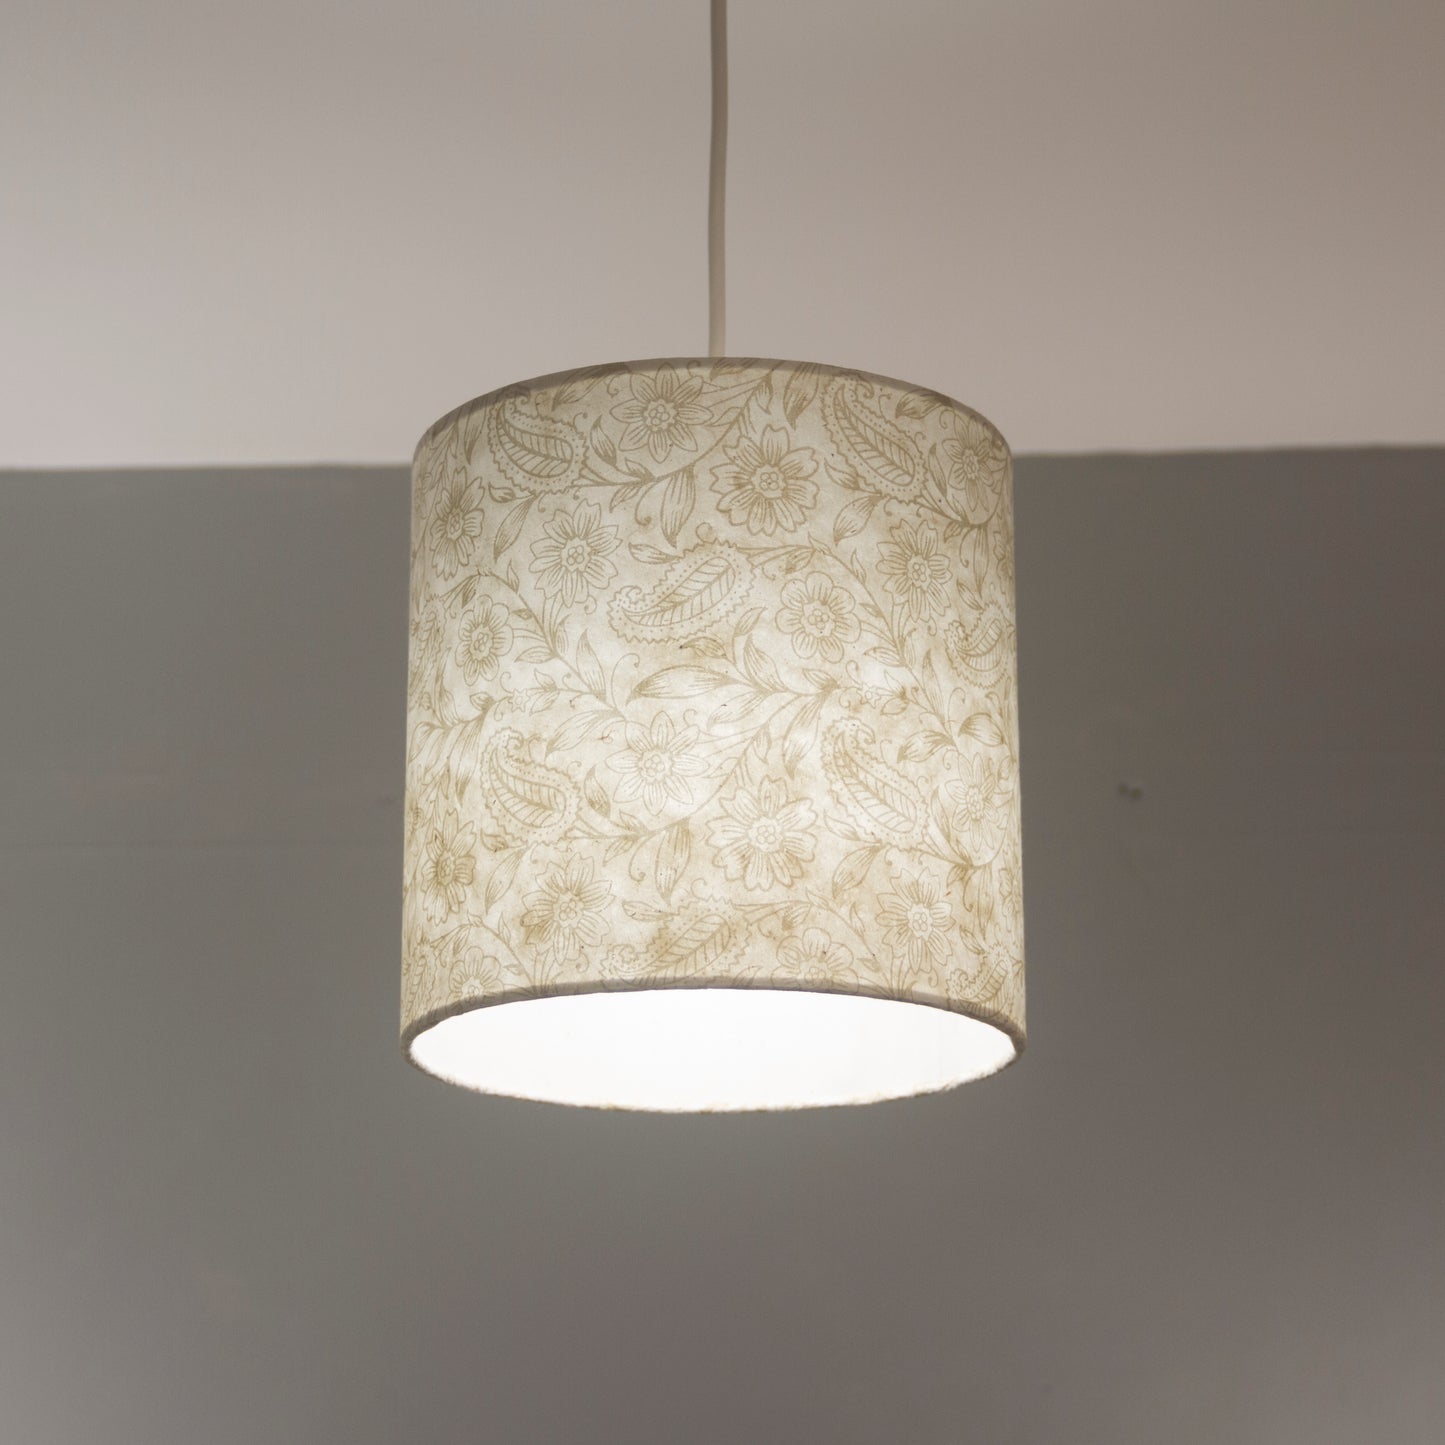 Drum Lamp Shade - P69 - Garden Gold on Natural, 20cm(d) x 20cm(h)